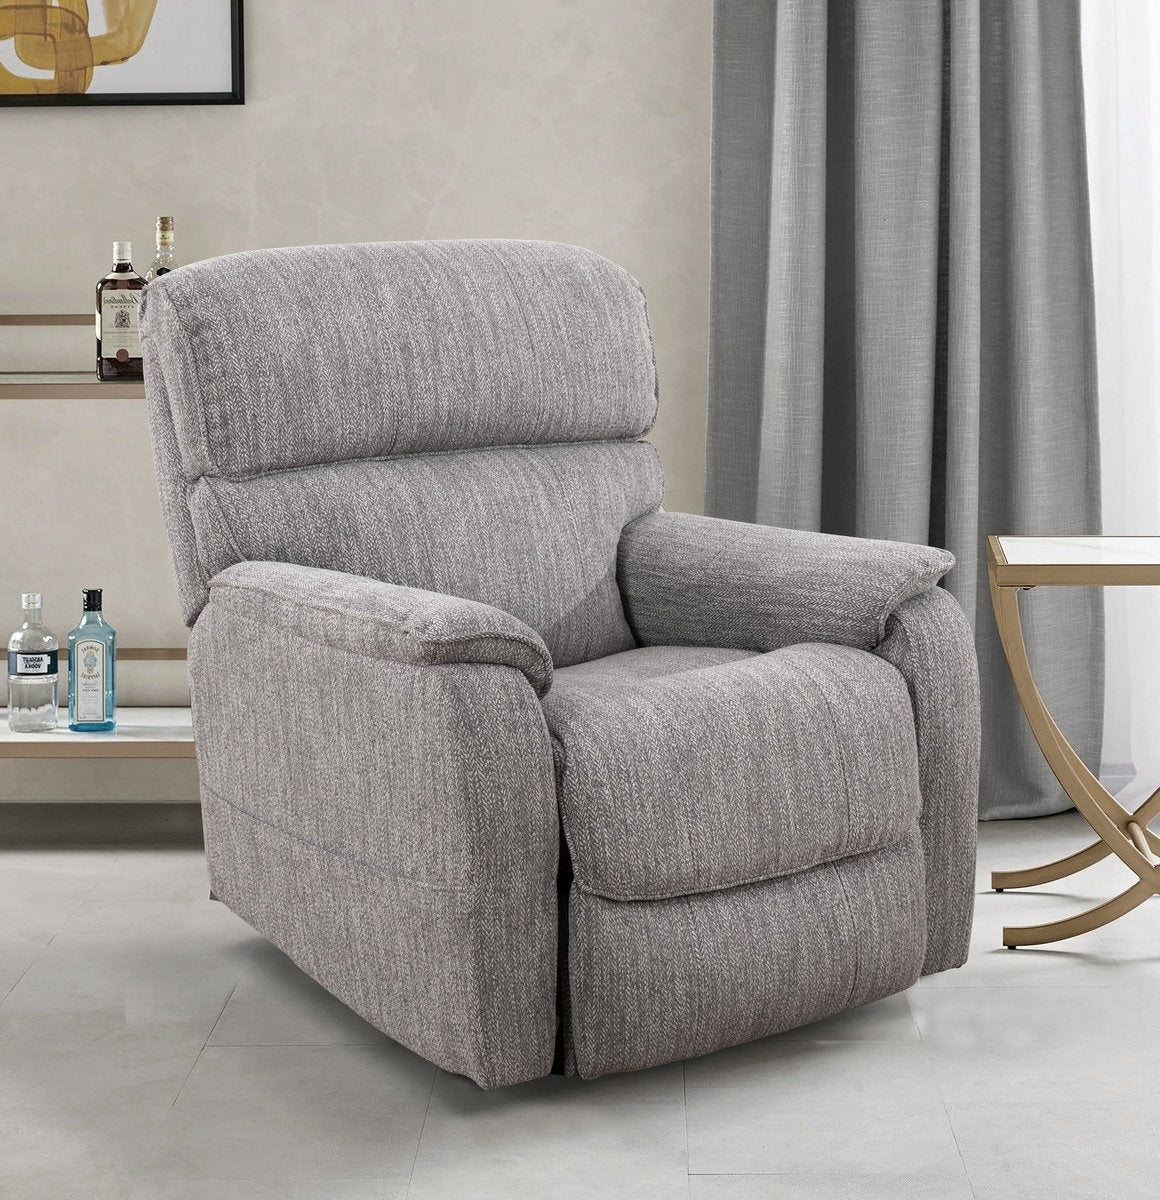 Grey Fabric Lift Chair with Solid Hardwood Frame